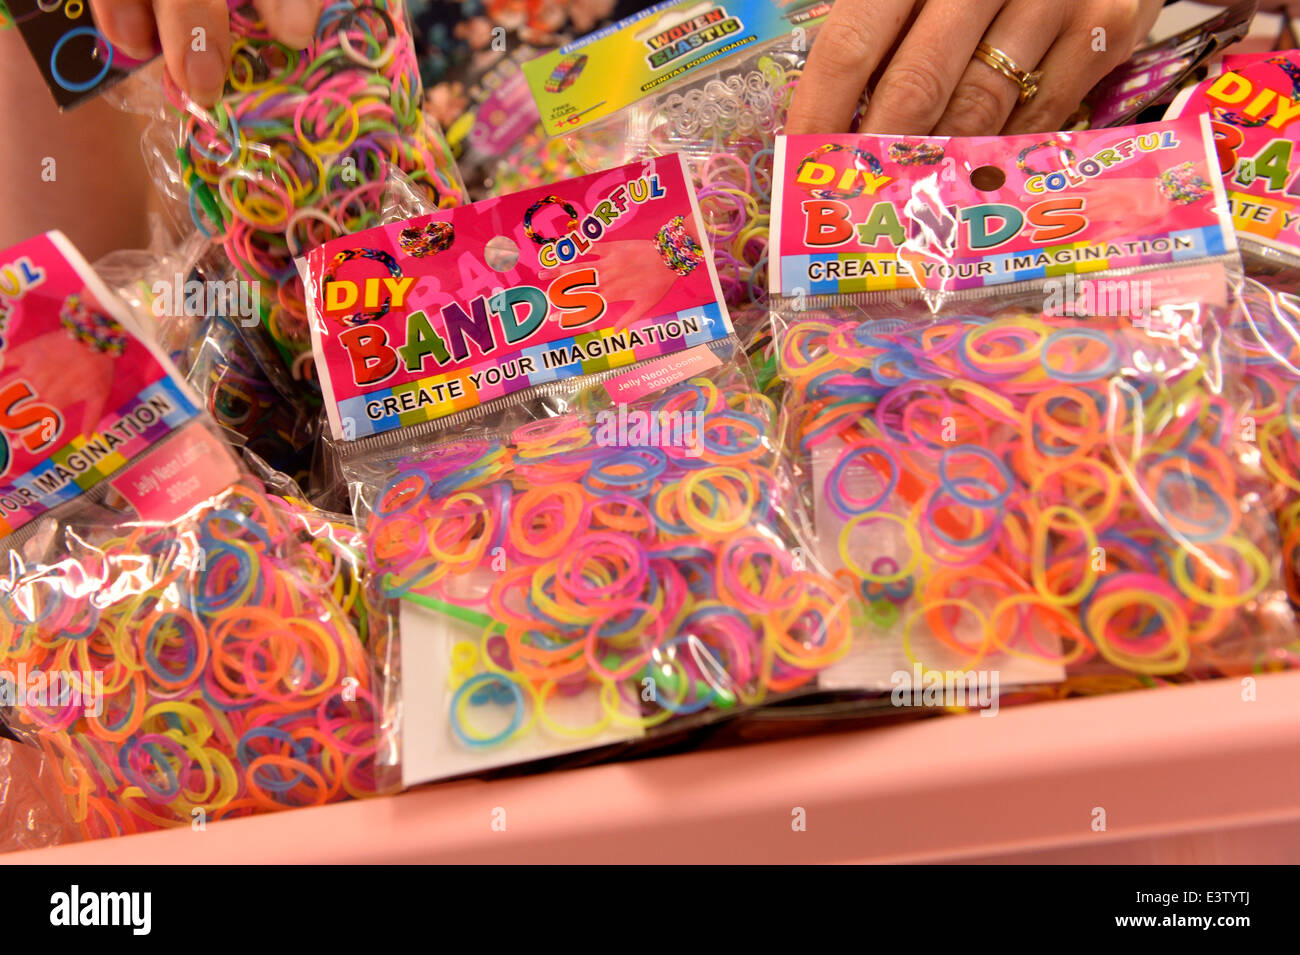 Loom bands the multi coloured elastic rubber bands that are the latest craze for children. The bright bands are woven together to create jewellery STUART WALKER / ALAMY NEWS Stock Photo